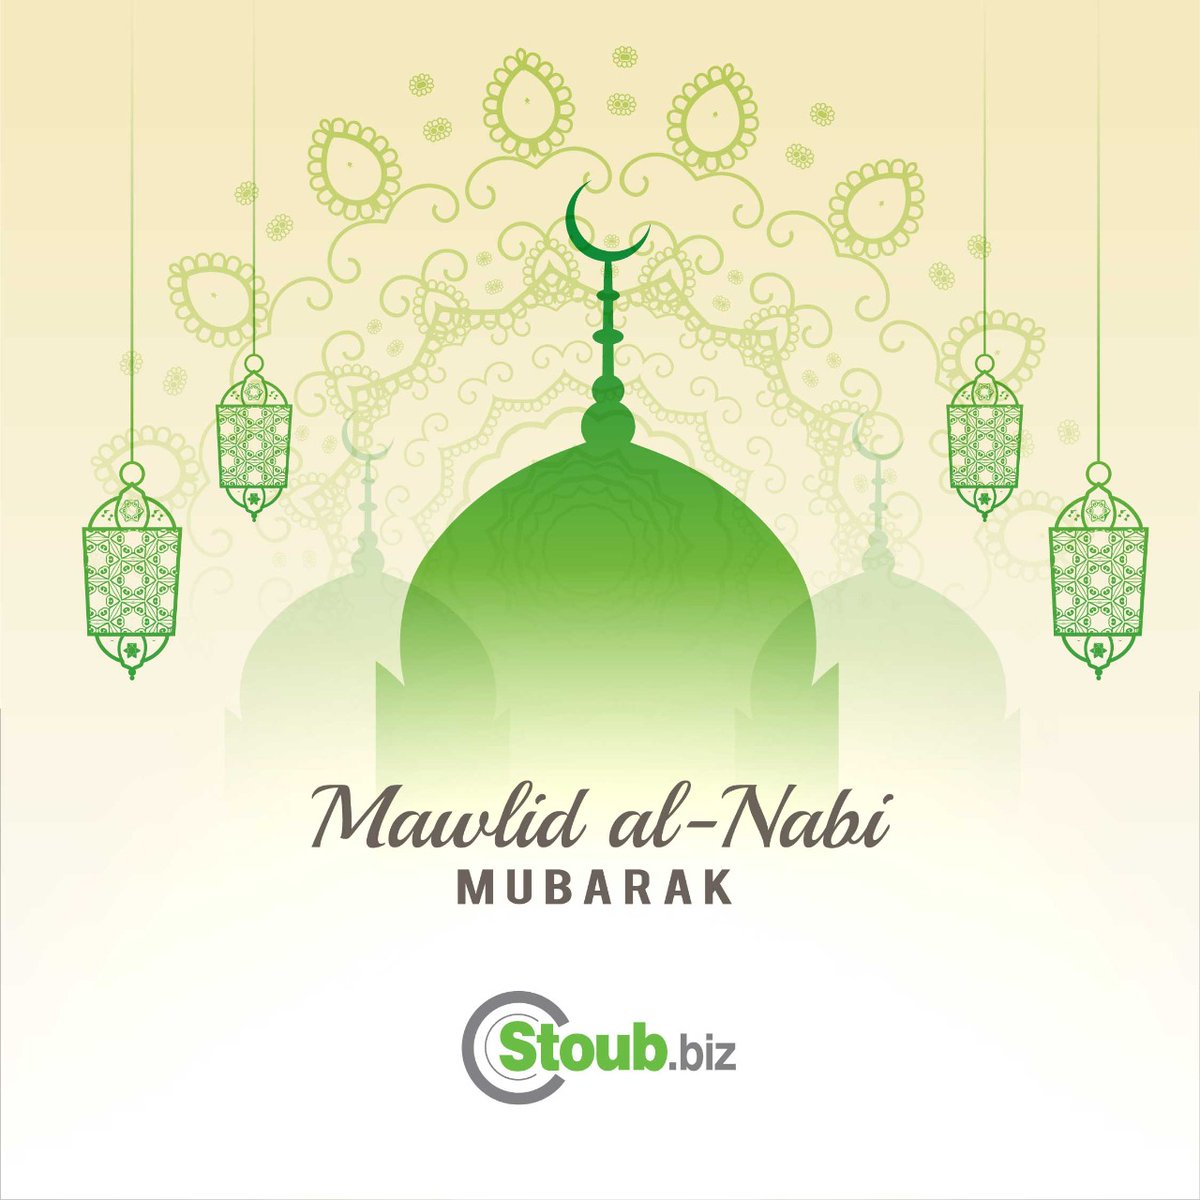 On this auspicious occasion of Mawlid al-Nabi, we wish you and your family peace and happiness, and may you find success in all your endeavours ahead.

#StoubBizMotors #Dubai #Supercar